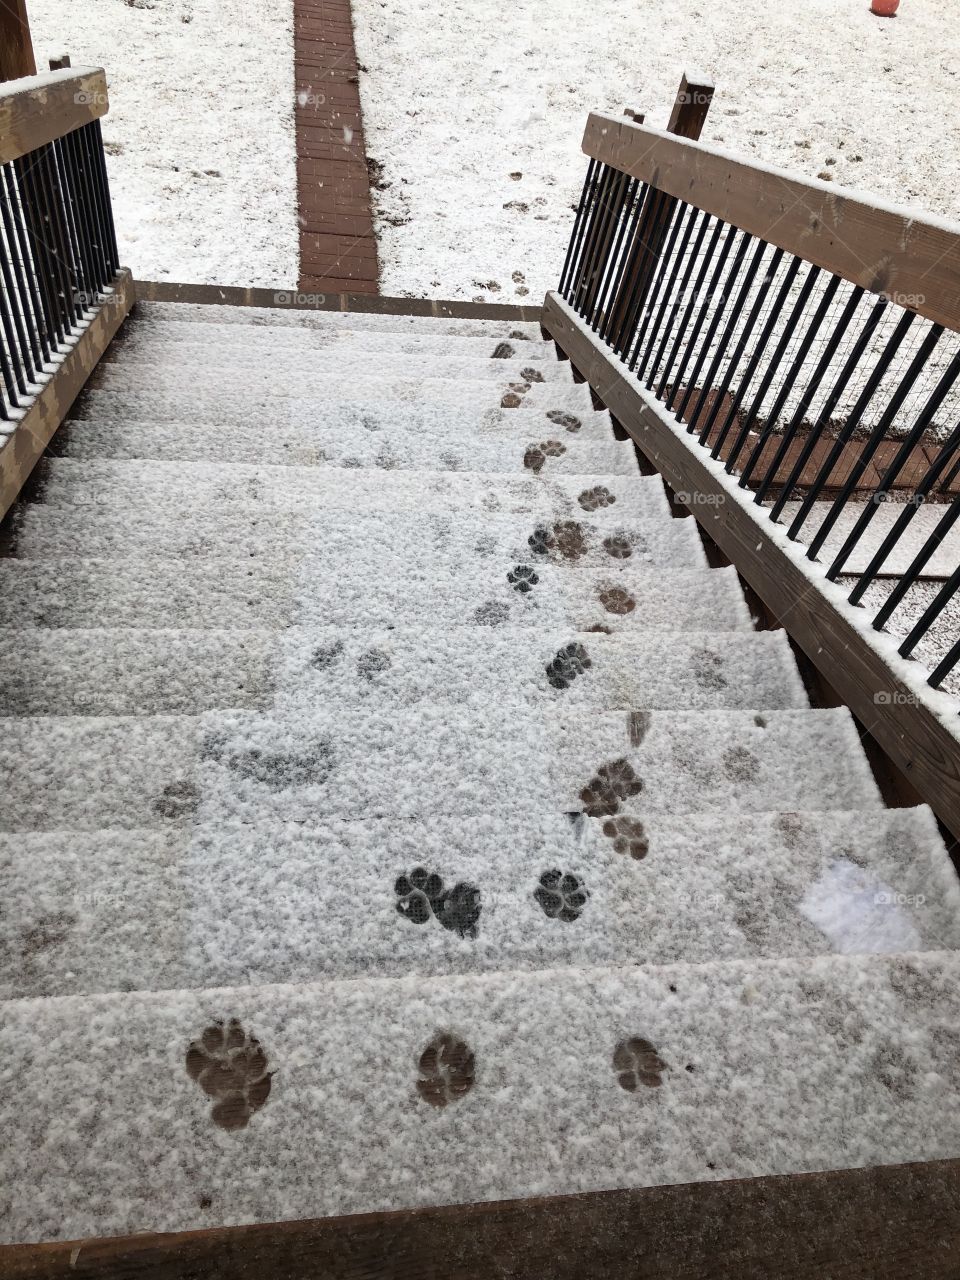 Dog prints in the snow